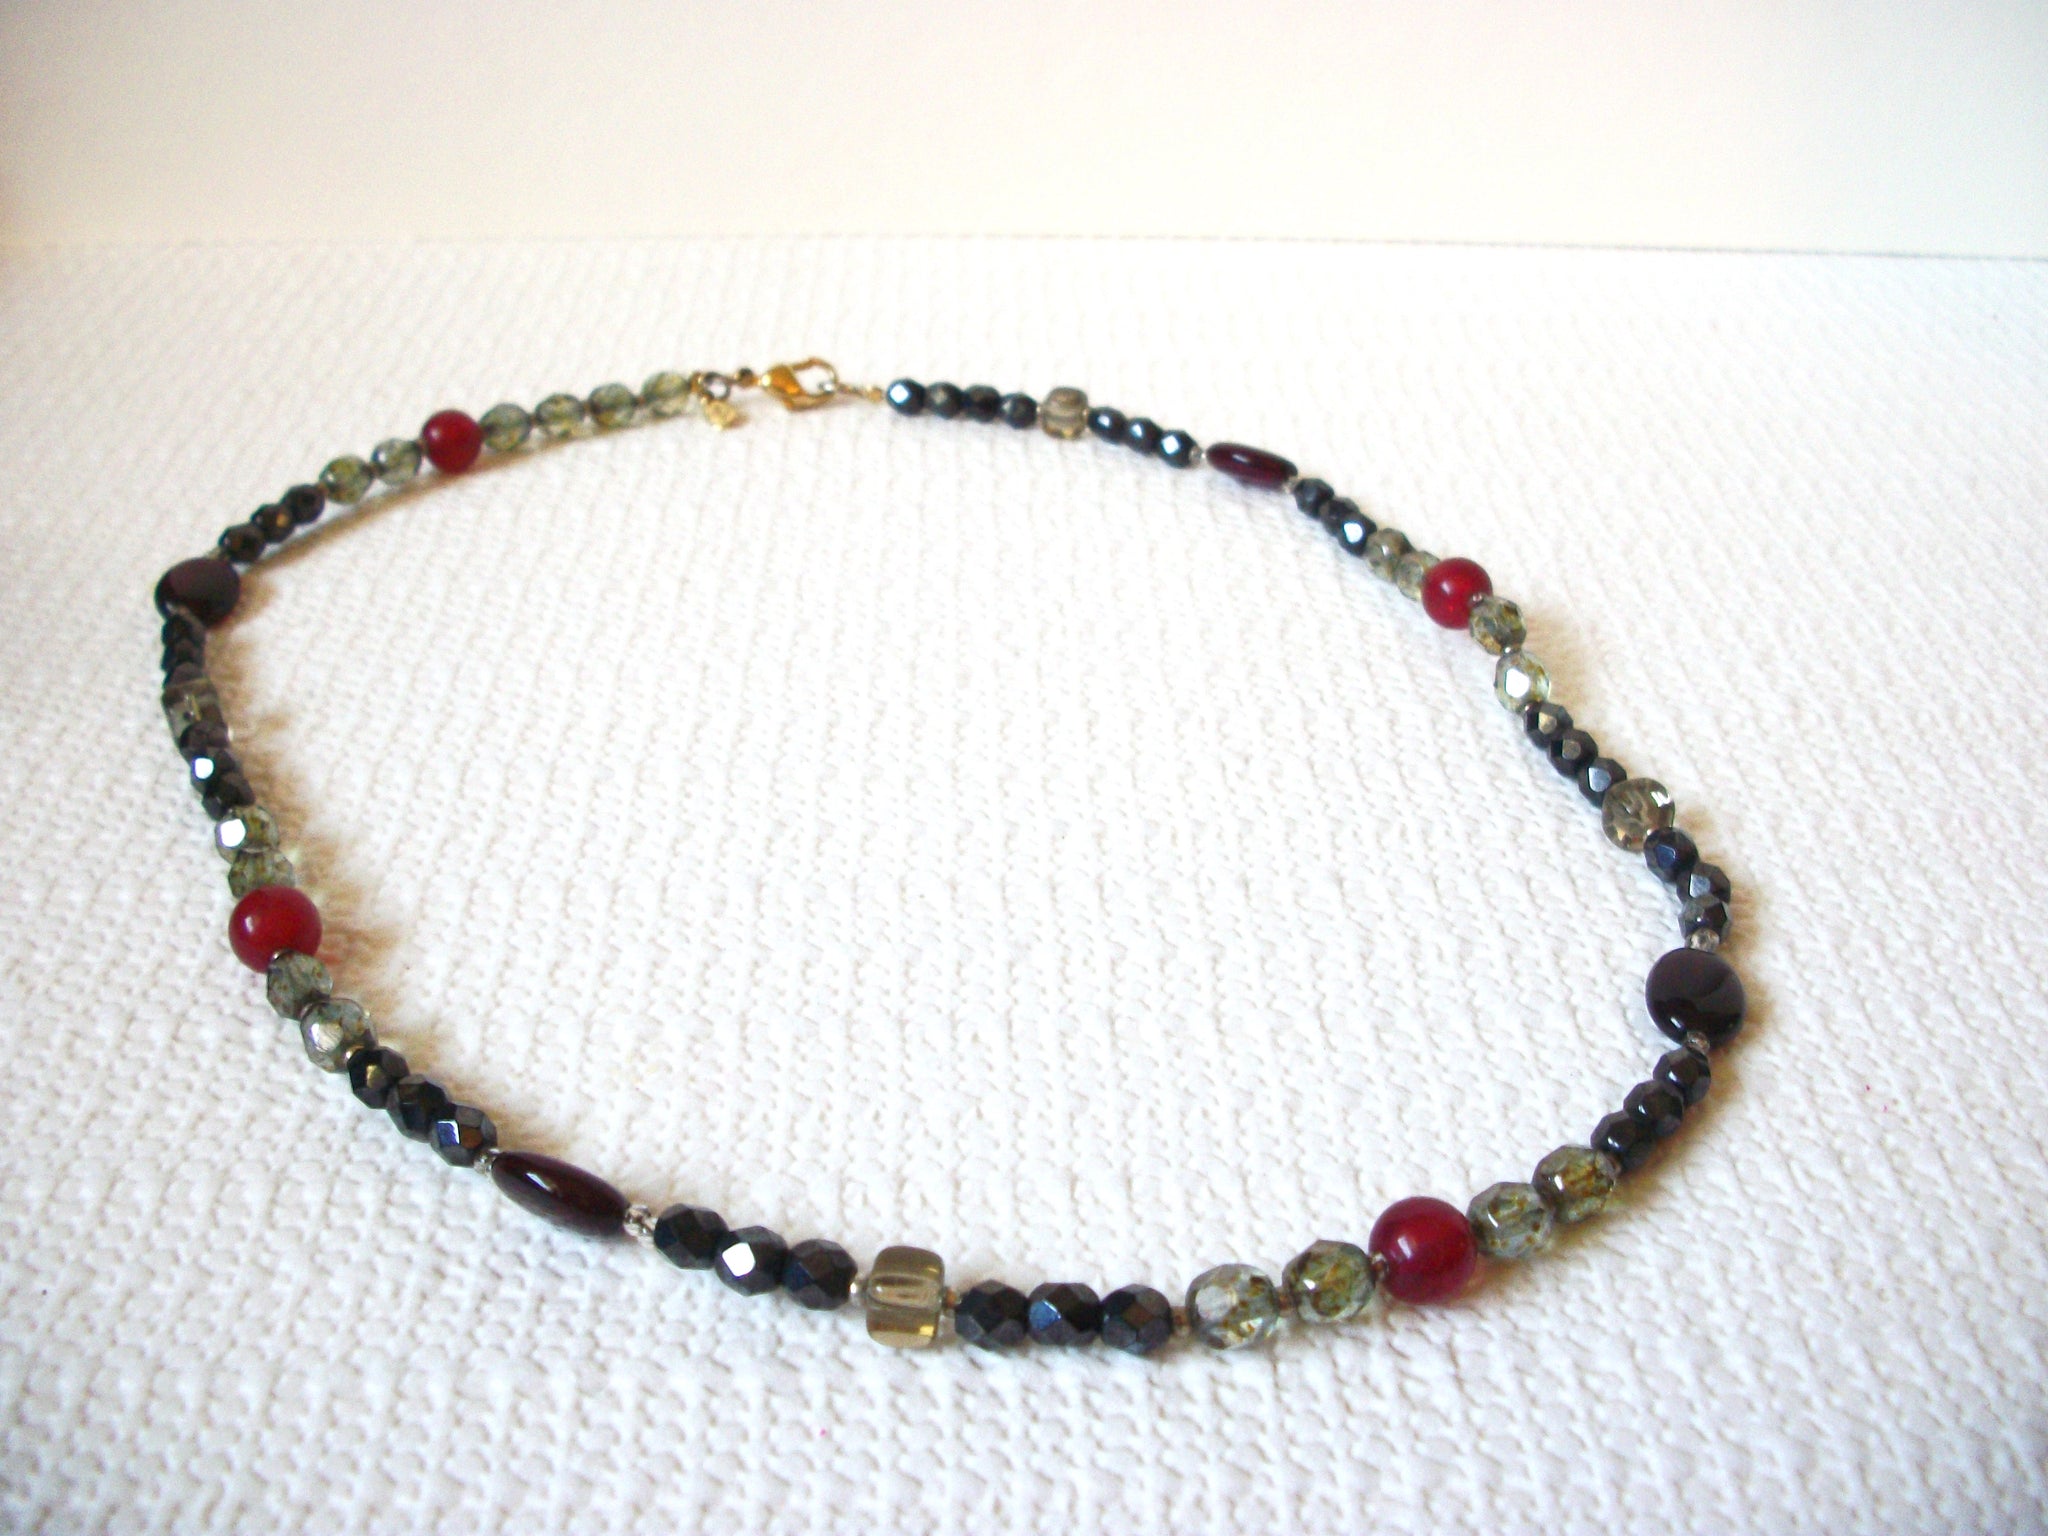 Vintage Glass Beads Necklace 81720